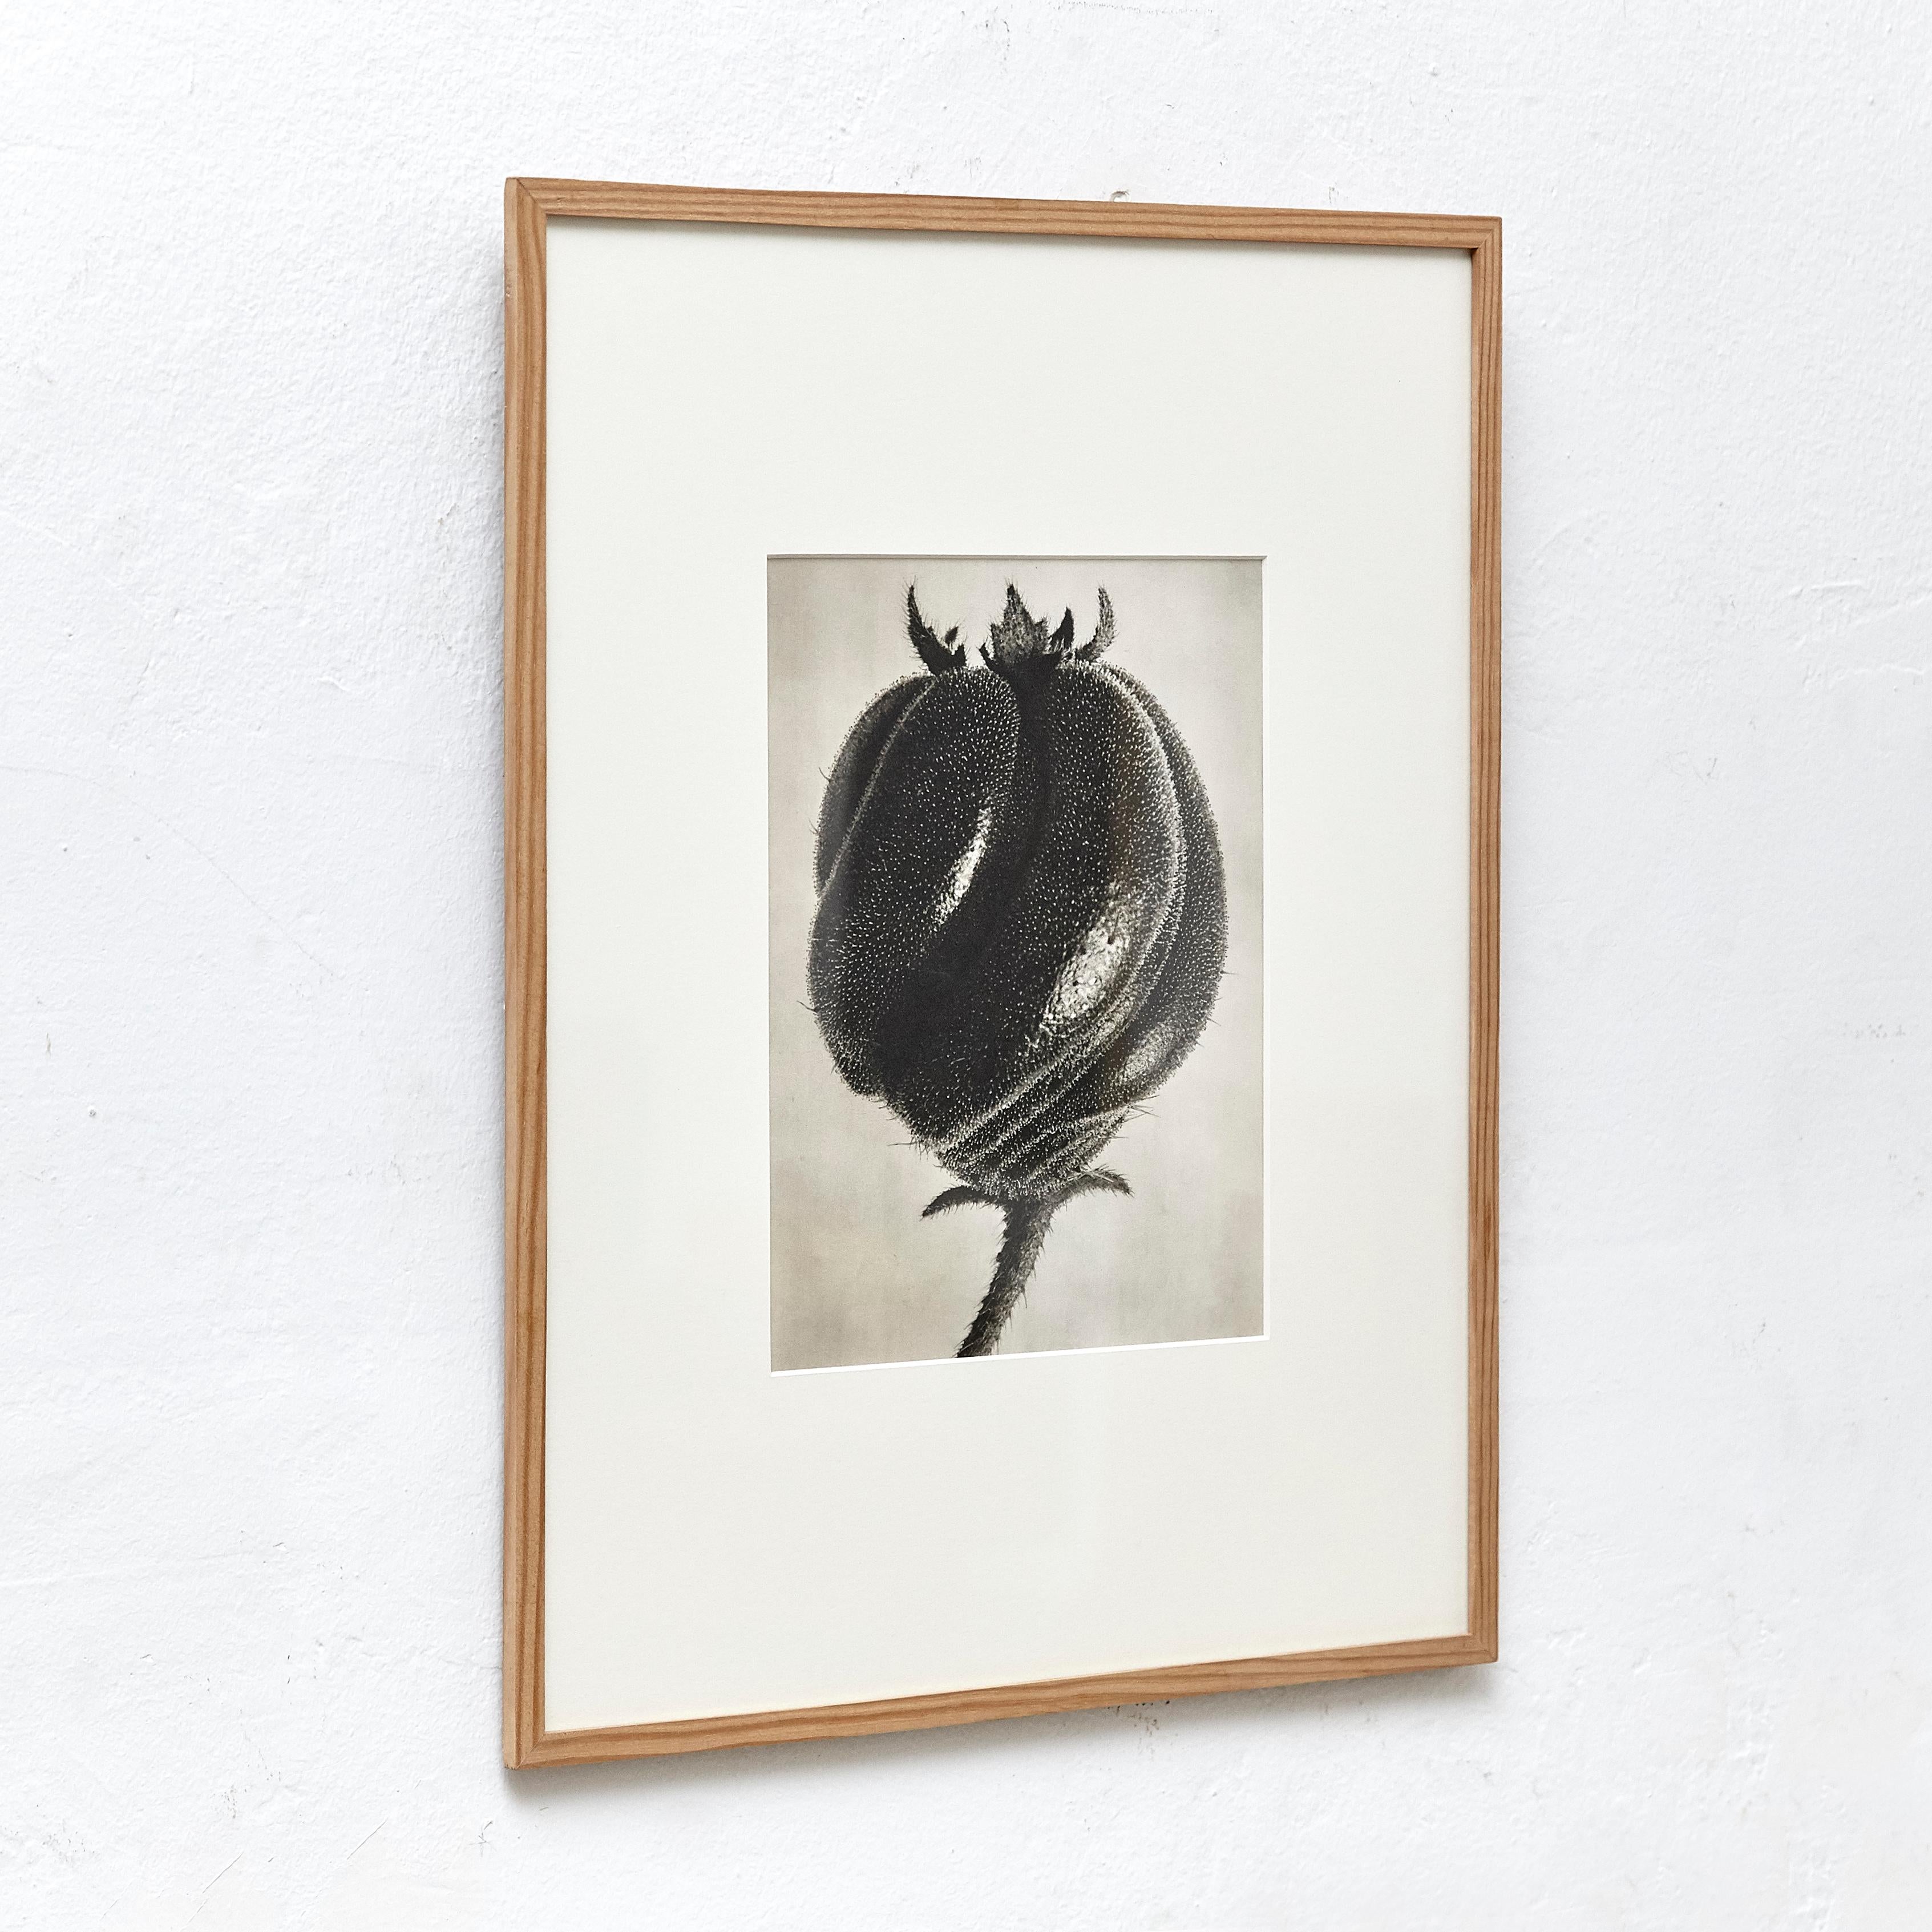 Embrace the captivating beauty of nature with this iconic Karl Blossfeldt Black & White Flower Photogravure, a striking piece of botanic photography from 1942. Renowned for his groundbreaking work in capturing the intricate details of plants,